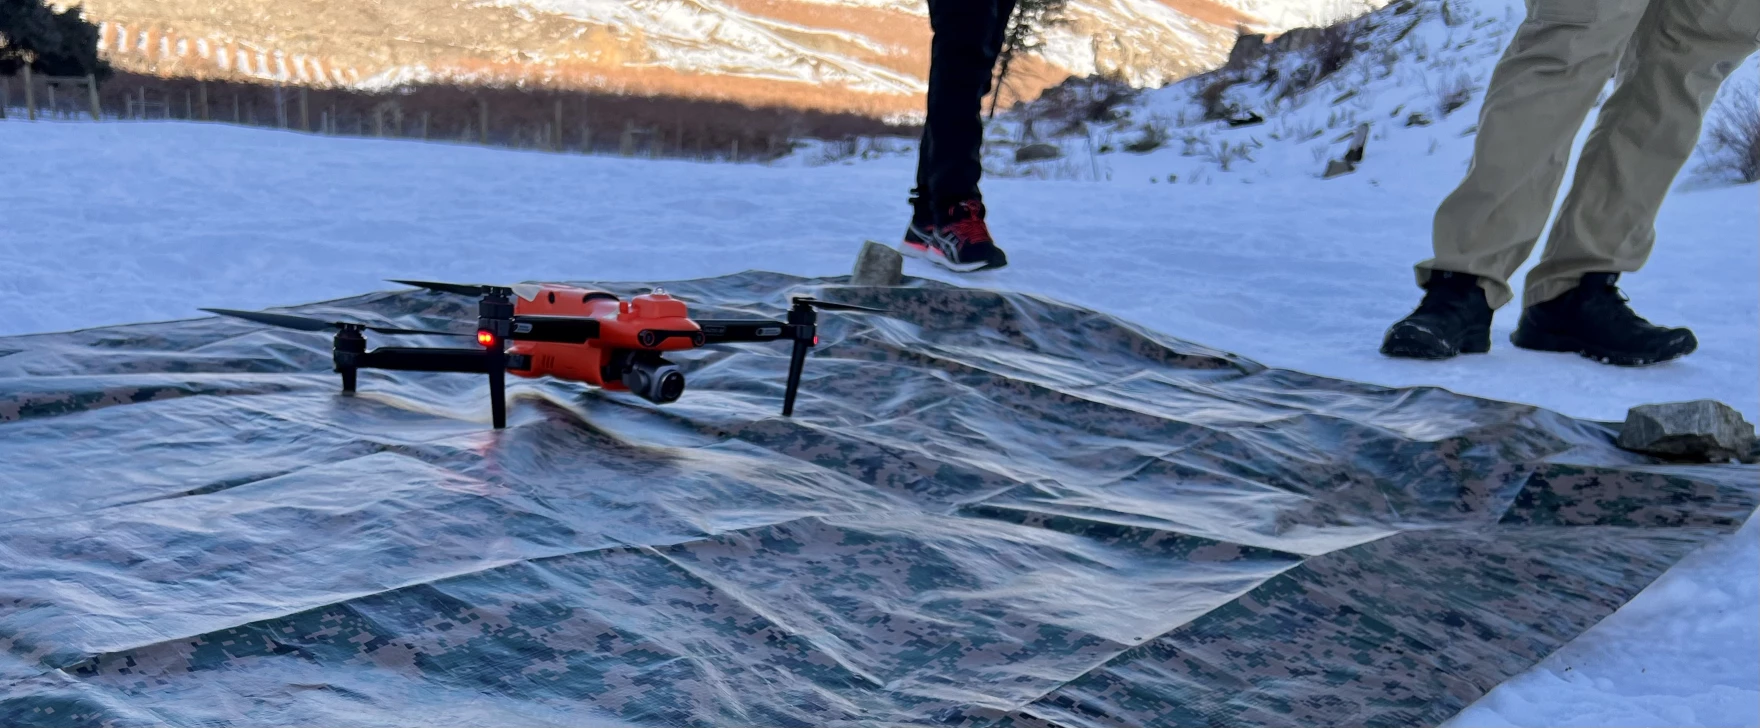 Special forces fighters used the snowy hillsides of Washington's Methow Valley to hone their drone piloting skills. For Dakota Mendenhall, landing the drone was the best part. "It's a culmination of all the skills that you learn," he said. "You have to be a lot more gentle on the sticks"